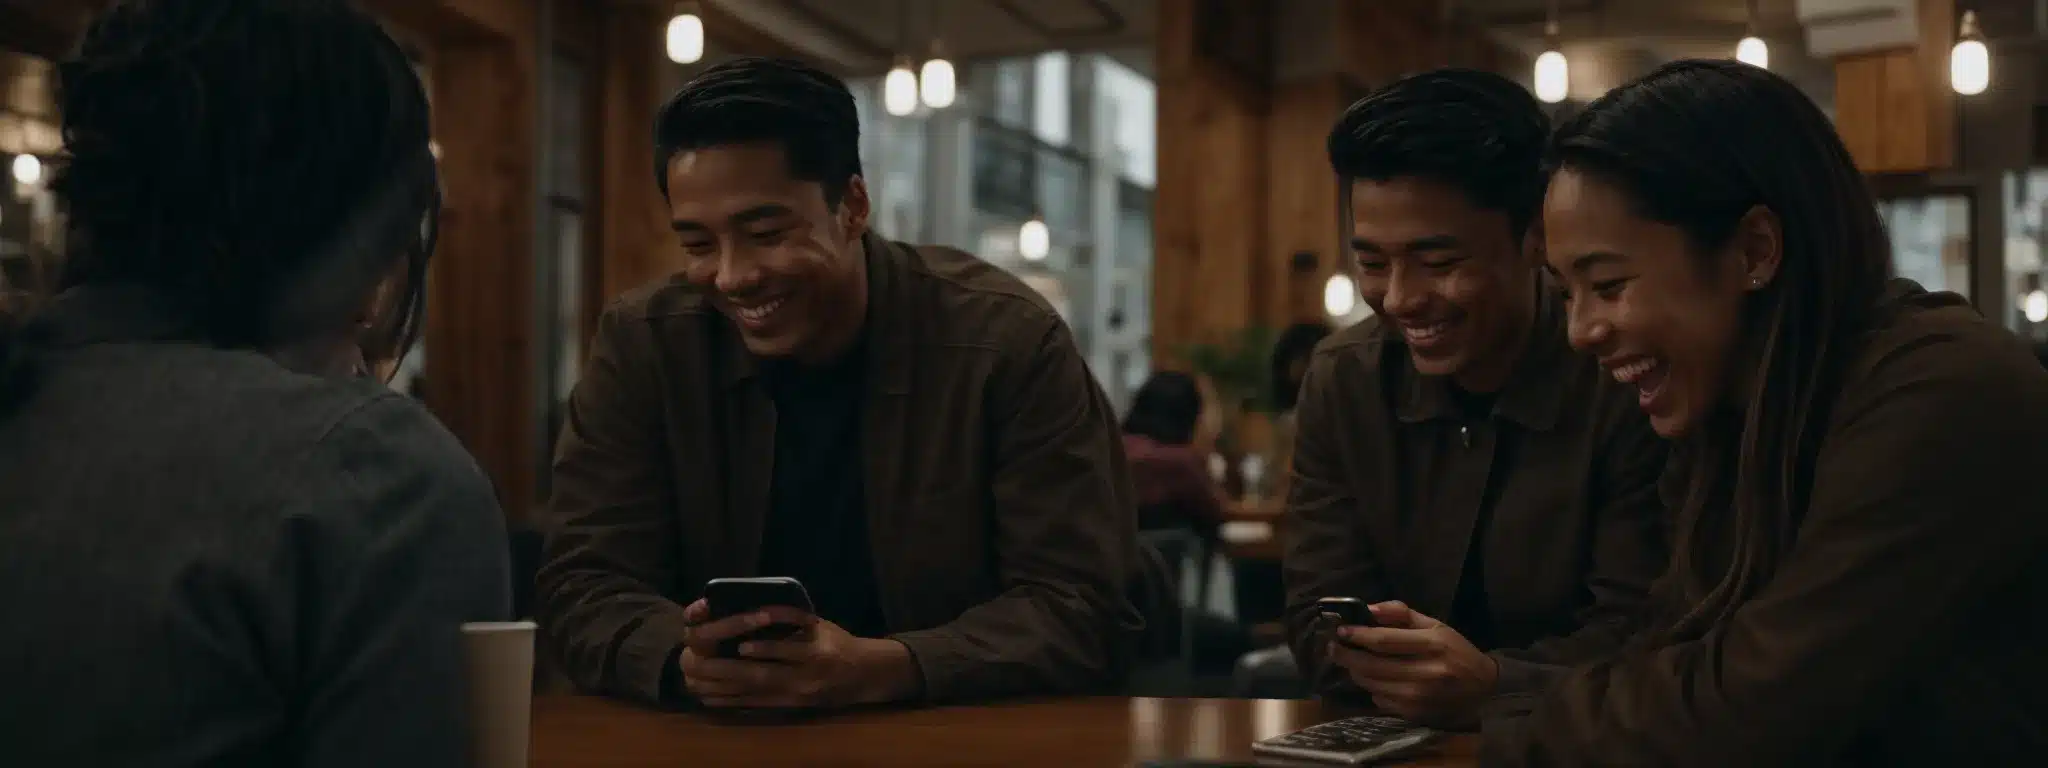 Two People Laugh Together While Looking At A Smartphone Screen In A Cozy CafÉ, Symbolizing A Personal Connection Through Social Media Interaction.